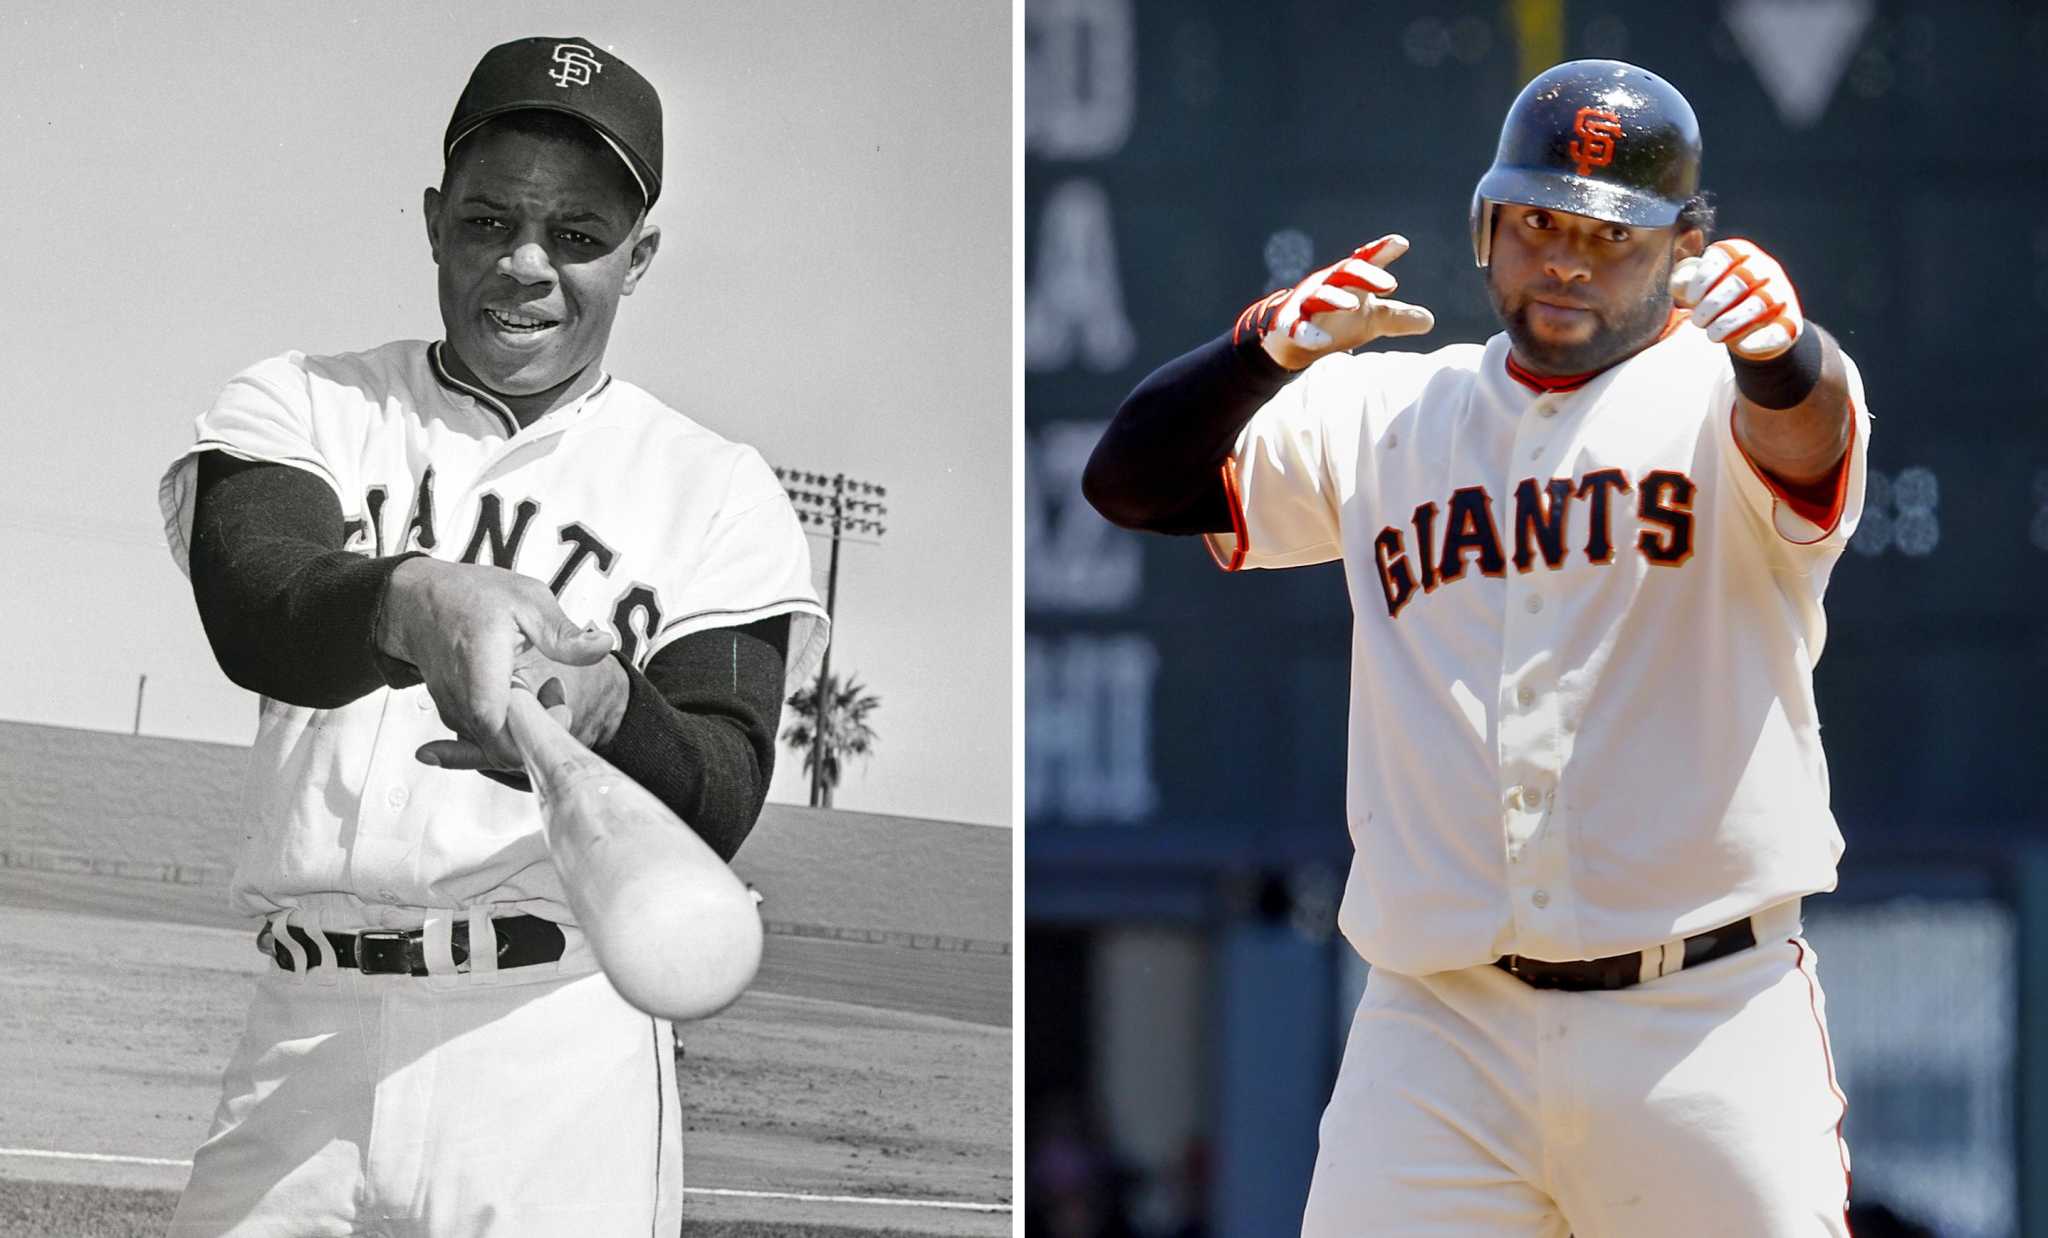 Pablo Sandoval's production under pressure started in little league